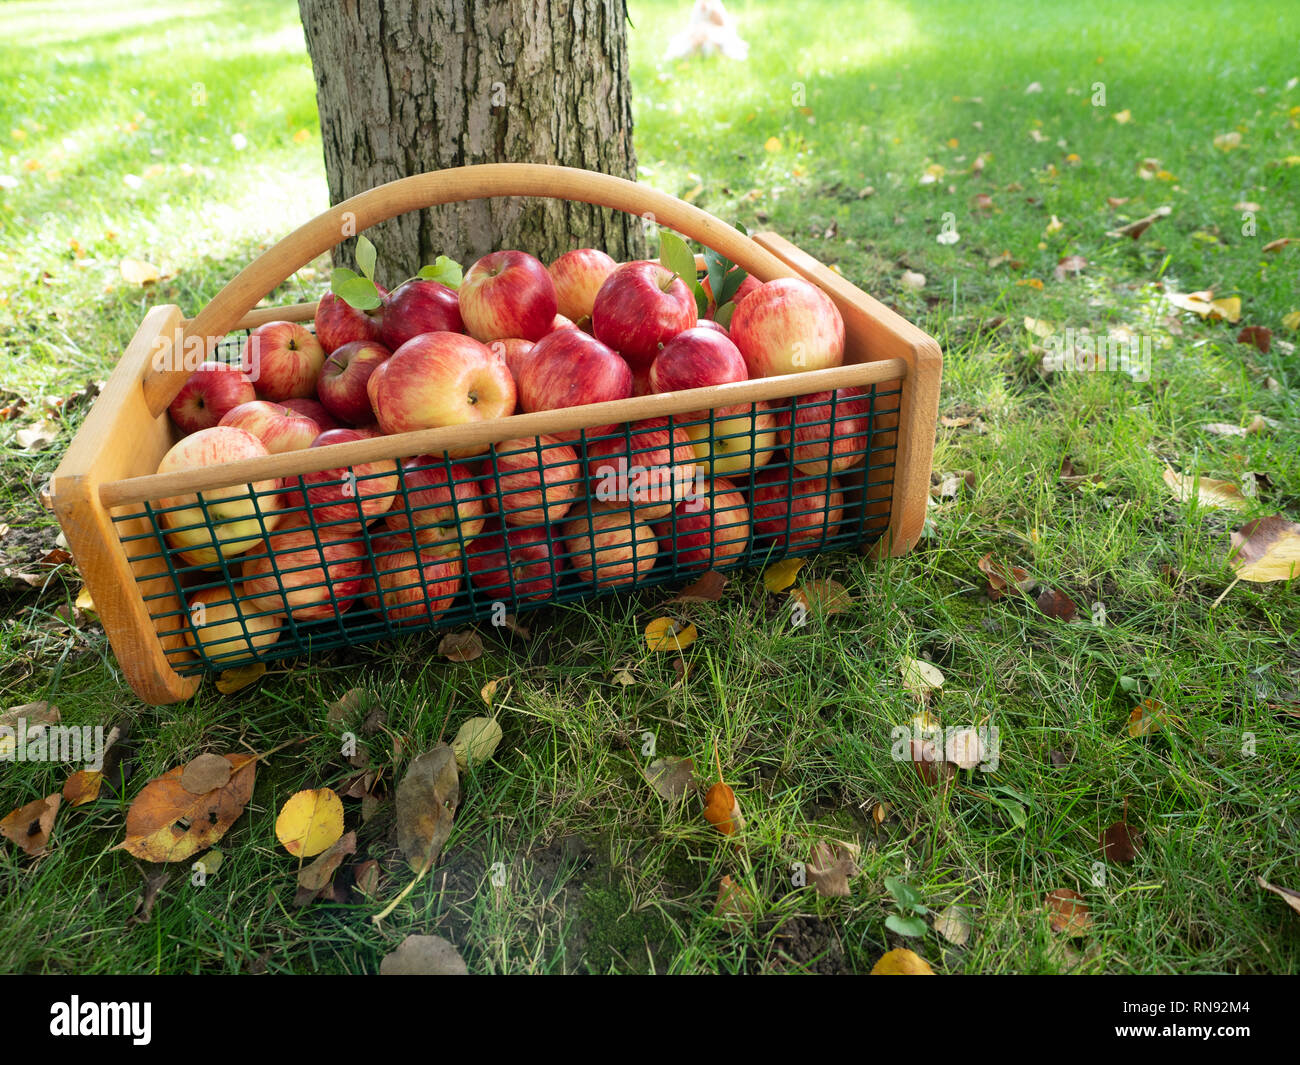 Sunlit wire and wood basket with ripe apples on grass with fallen leaves. Low angle view. Stock Photo